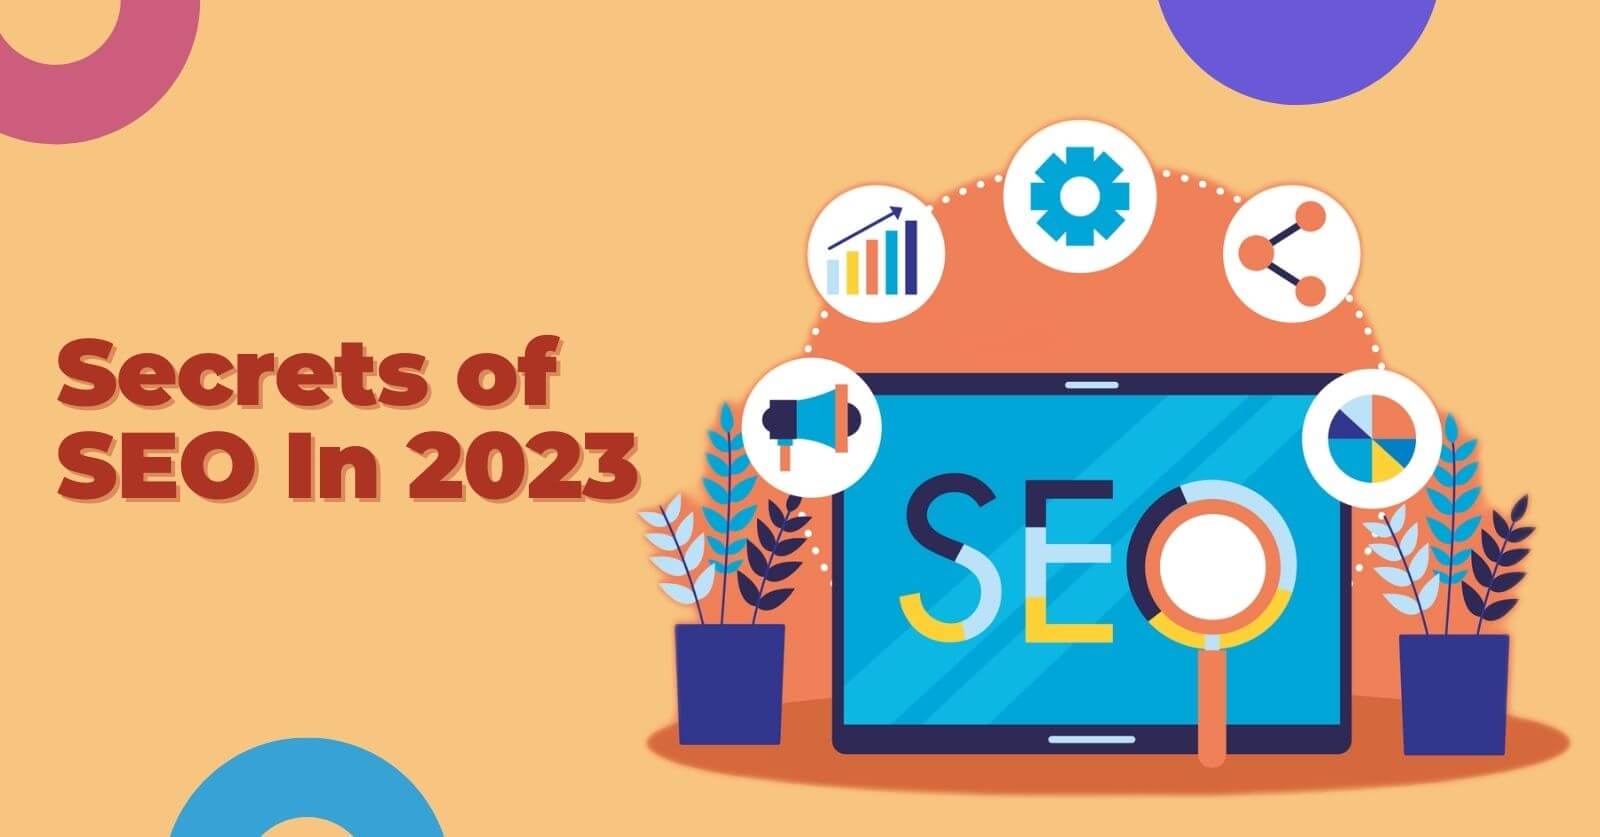 Unwrapping Top Secrets of SEO In 2023